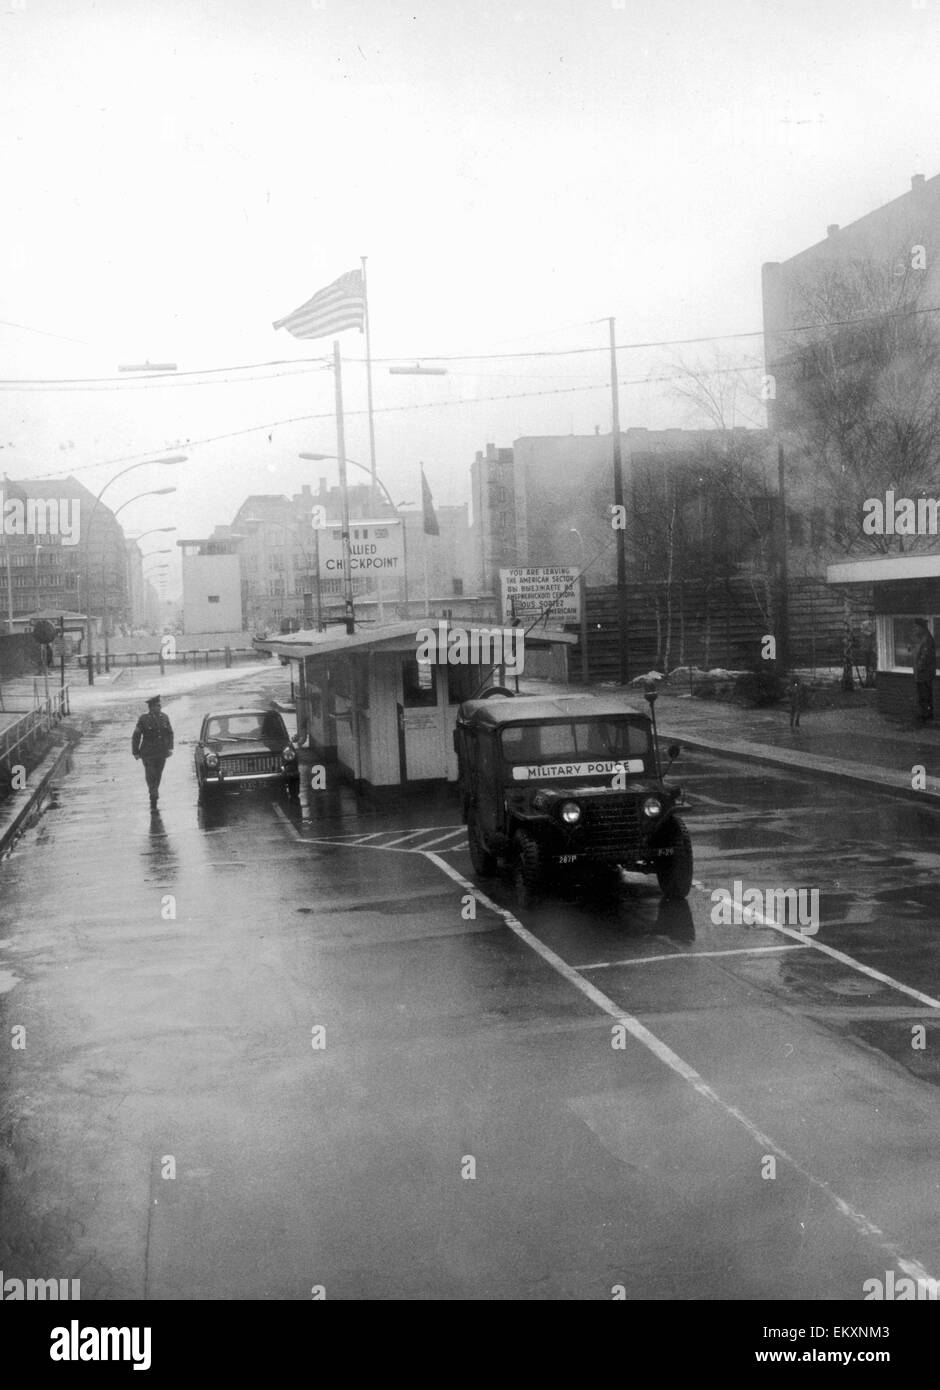 A wind swept rainy day at Checkpot Charlie on Berlin Friedrich strasse. In June 1953 during the workersÍ revolt in East Germany, American and Soviet tanks stood opposite each other in Friedrich Strasse, creating a credible threat of force at the Allies se Stock Photo